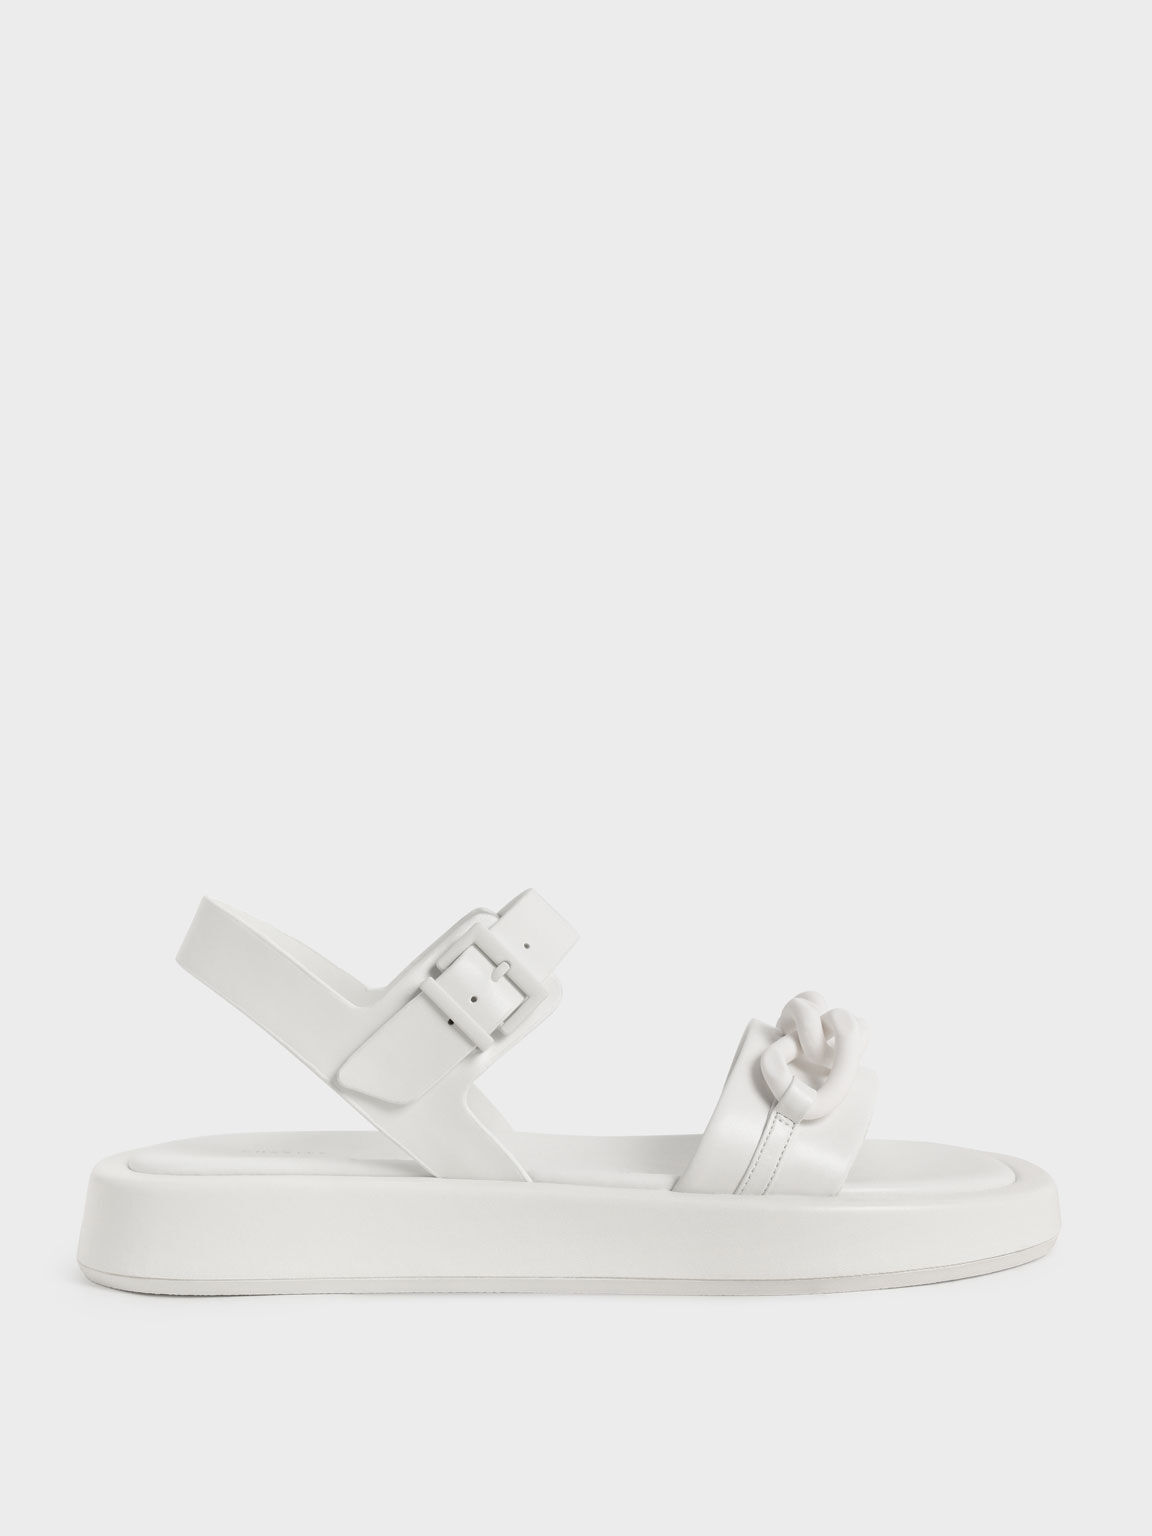 Sandal Ankle Strap Padded Chunky Chain-Link, White, hi-res